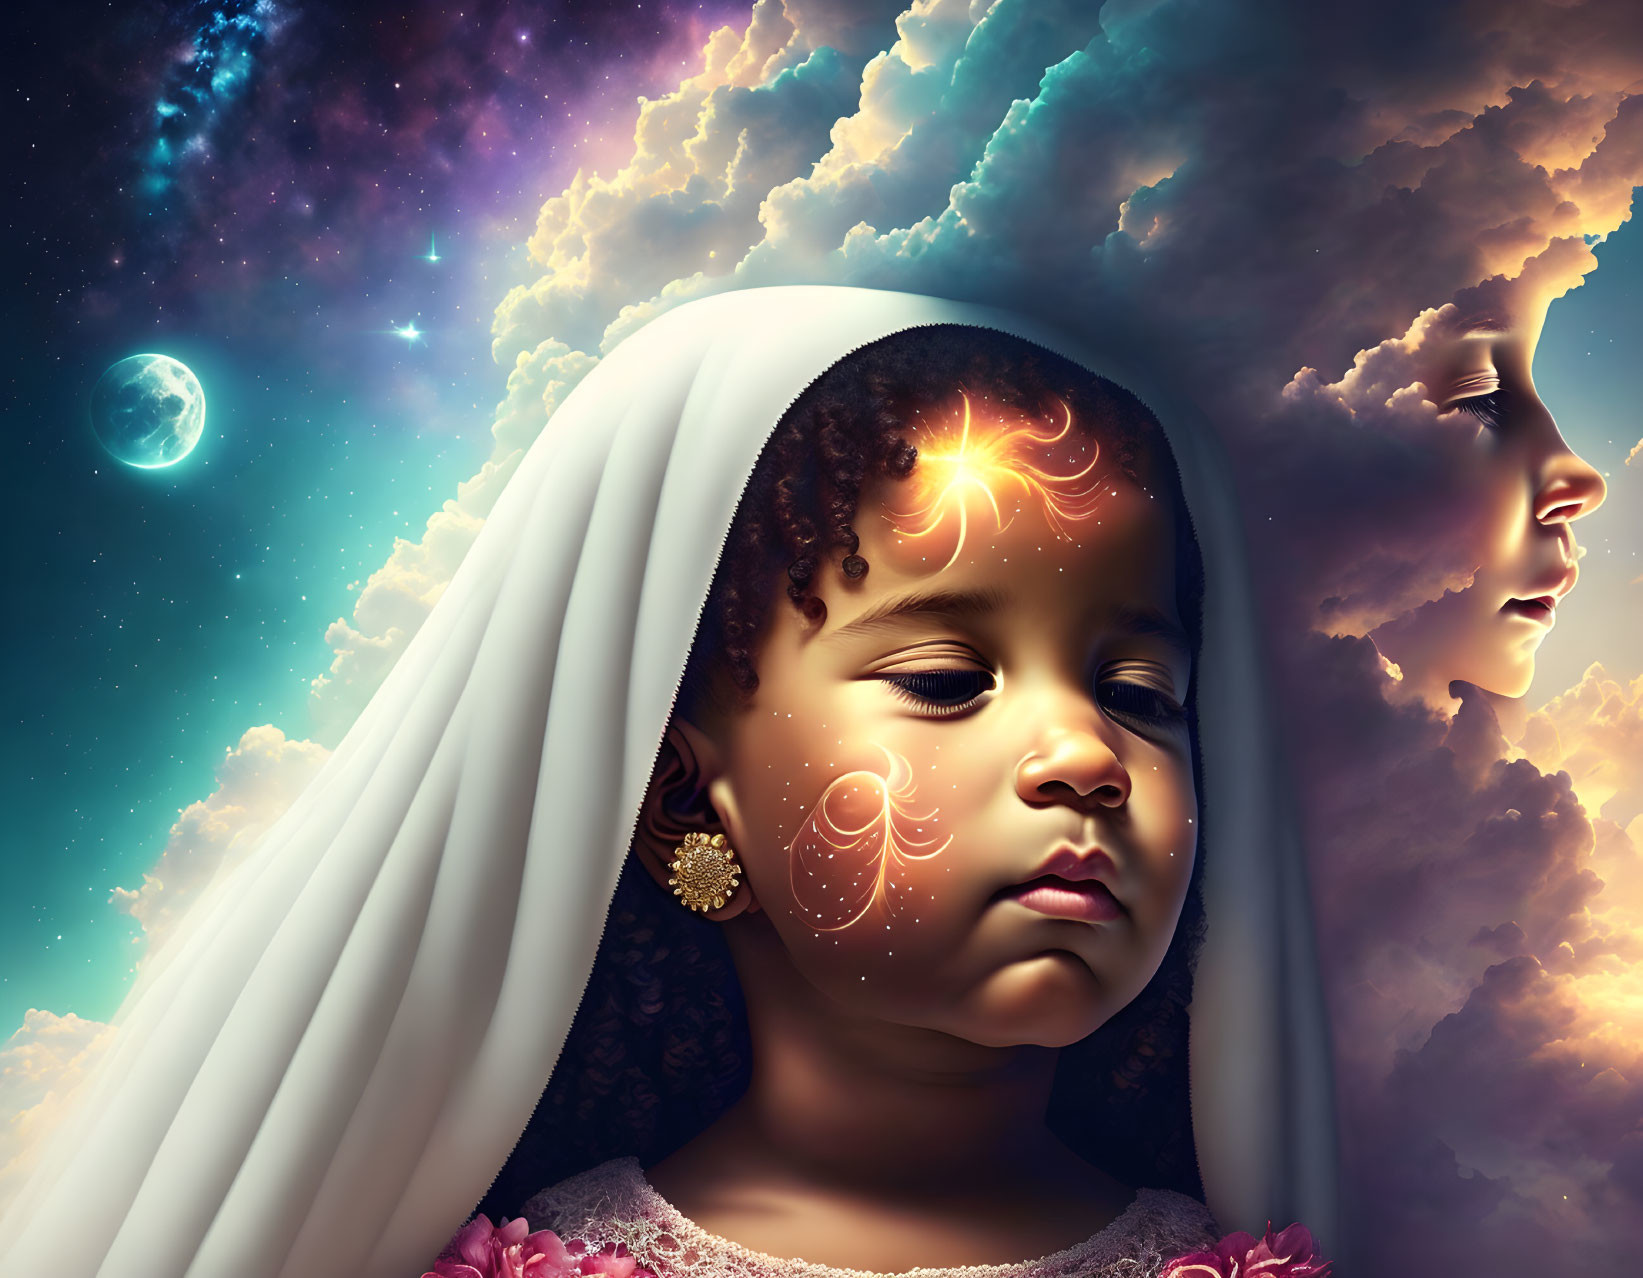 Surreal Child Portrait with Cosmic Background